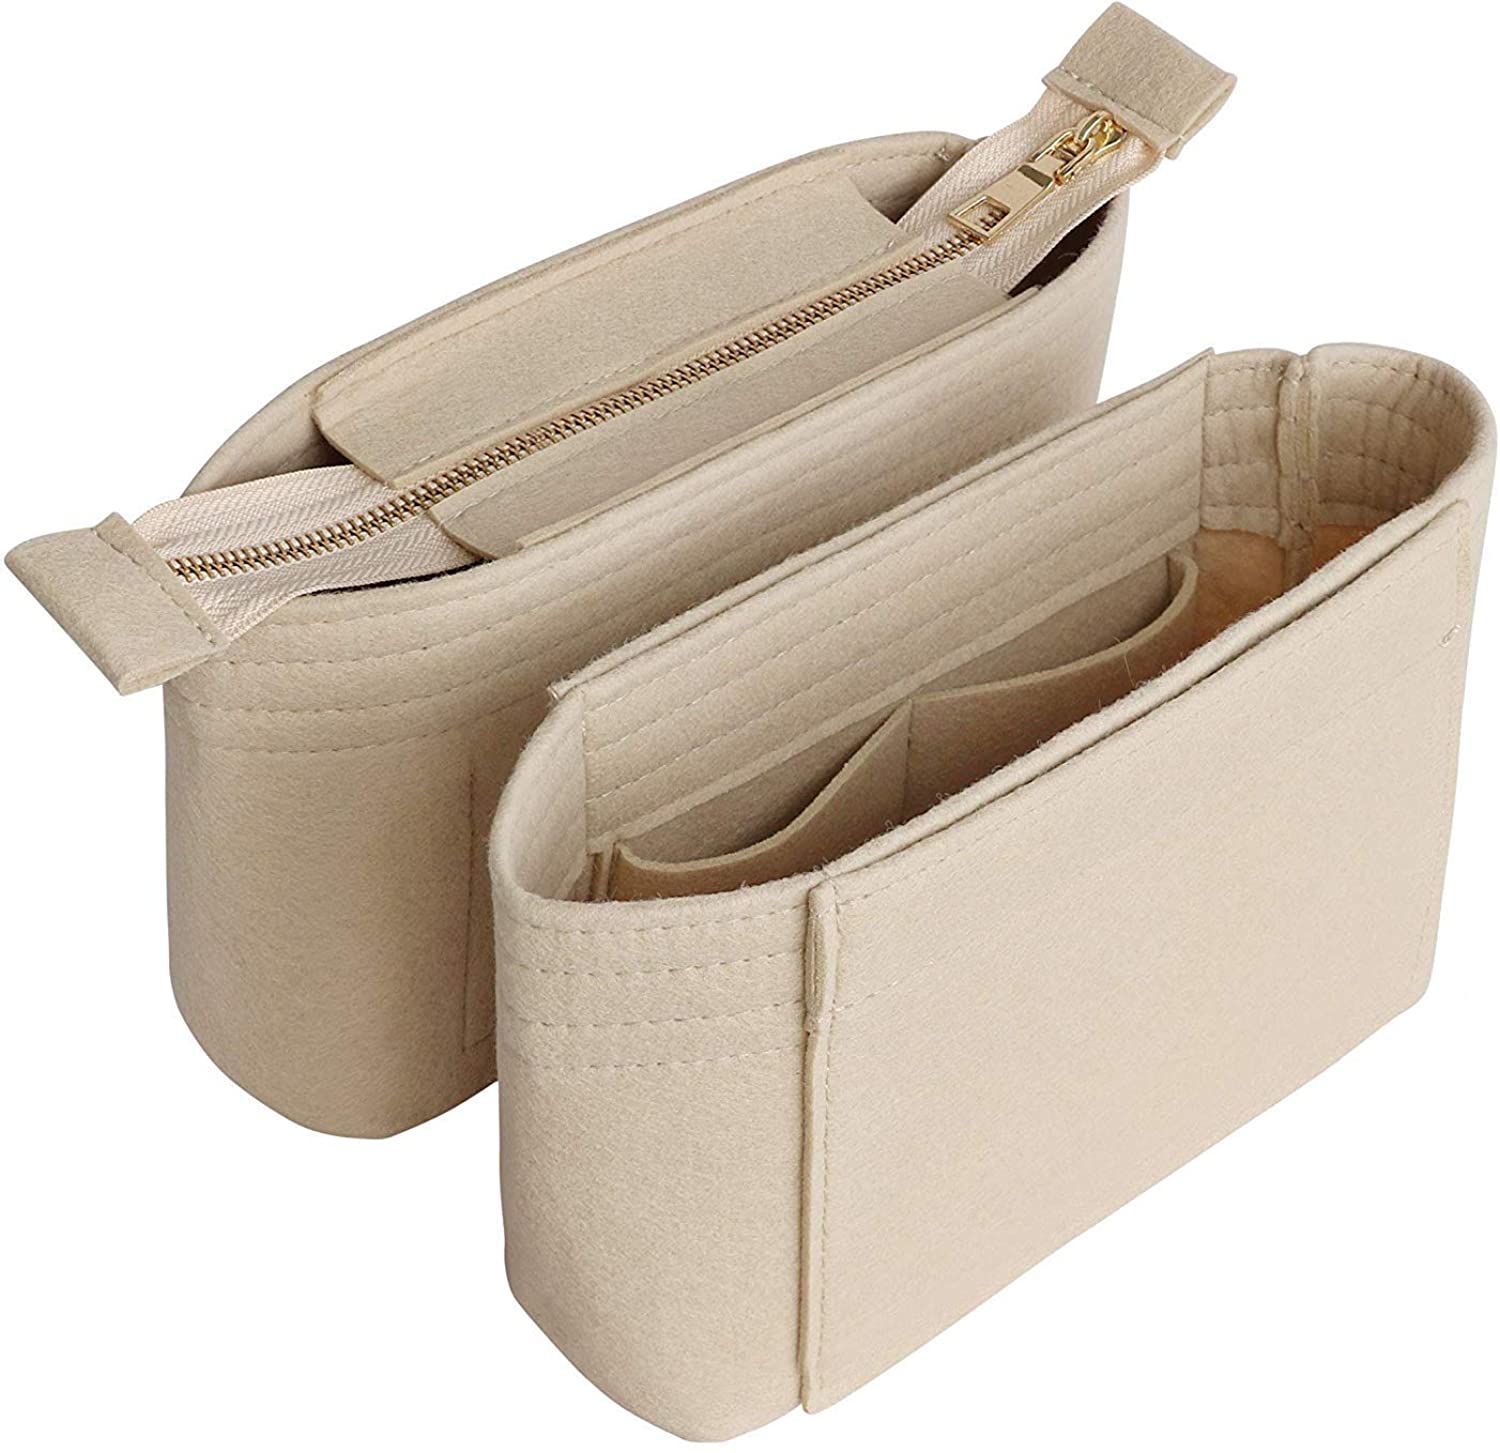 HyFanStr Purse Organizer Insert with Zipped Top for Tote Bag Handbag Shaper with 13 Pockets Beige XS 